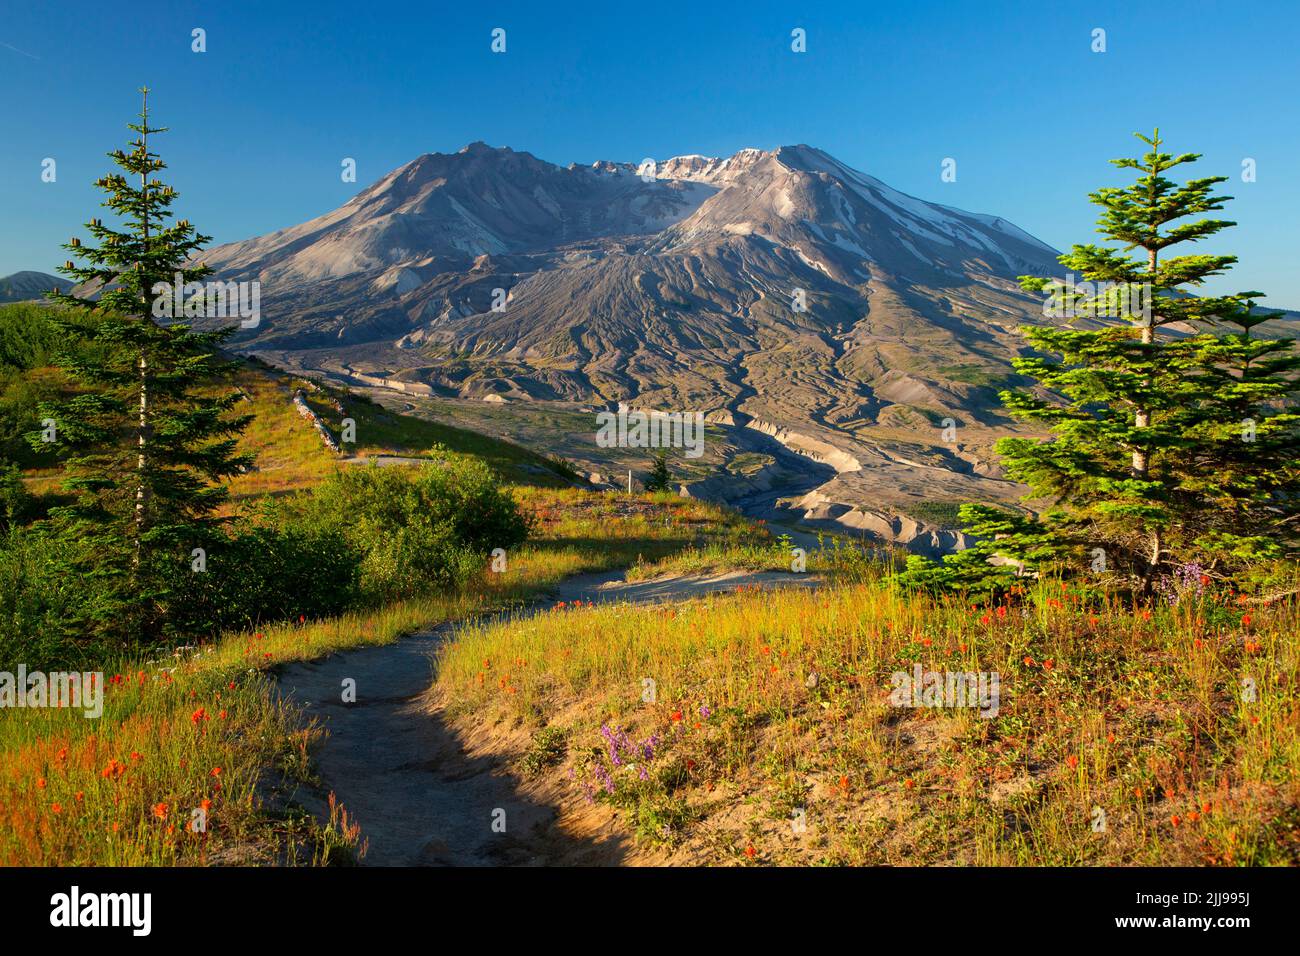 Mt St Helens with trail from Johnston Ridge, Mt St Helens National Volcanic Monument, Washington Stock Photo